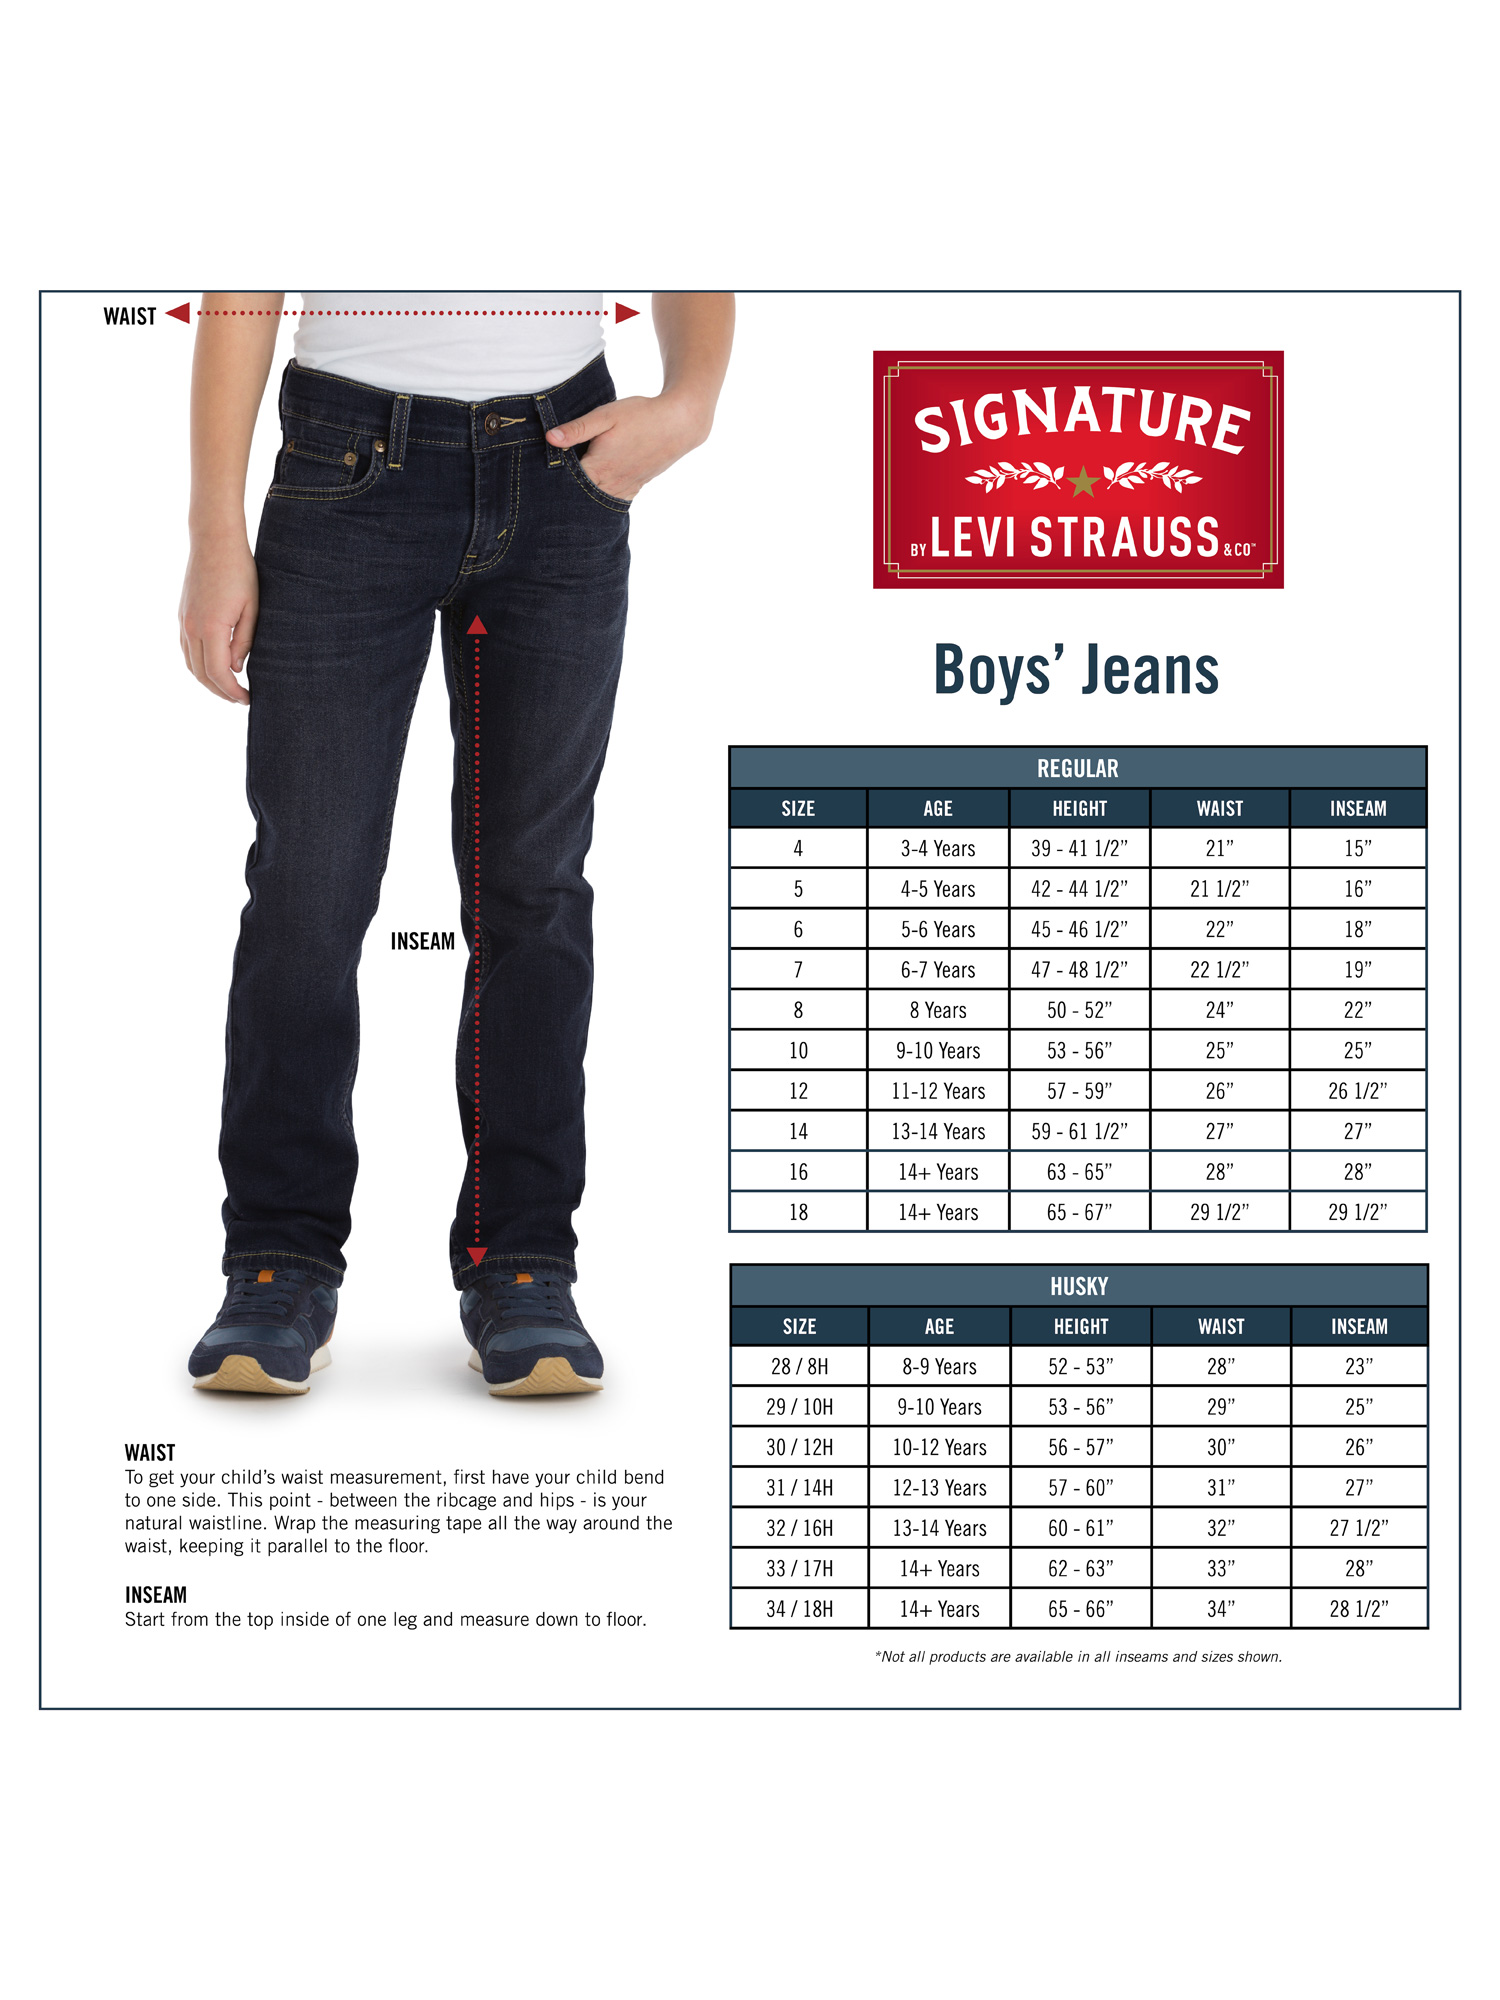 Signature by Levi Strauss & Co. Taper Athleisure Pants, Sizes 4-18 - image 4 of 7